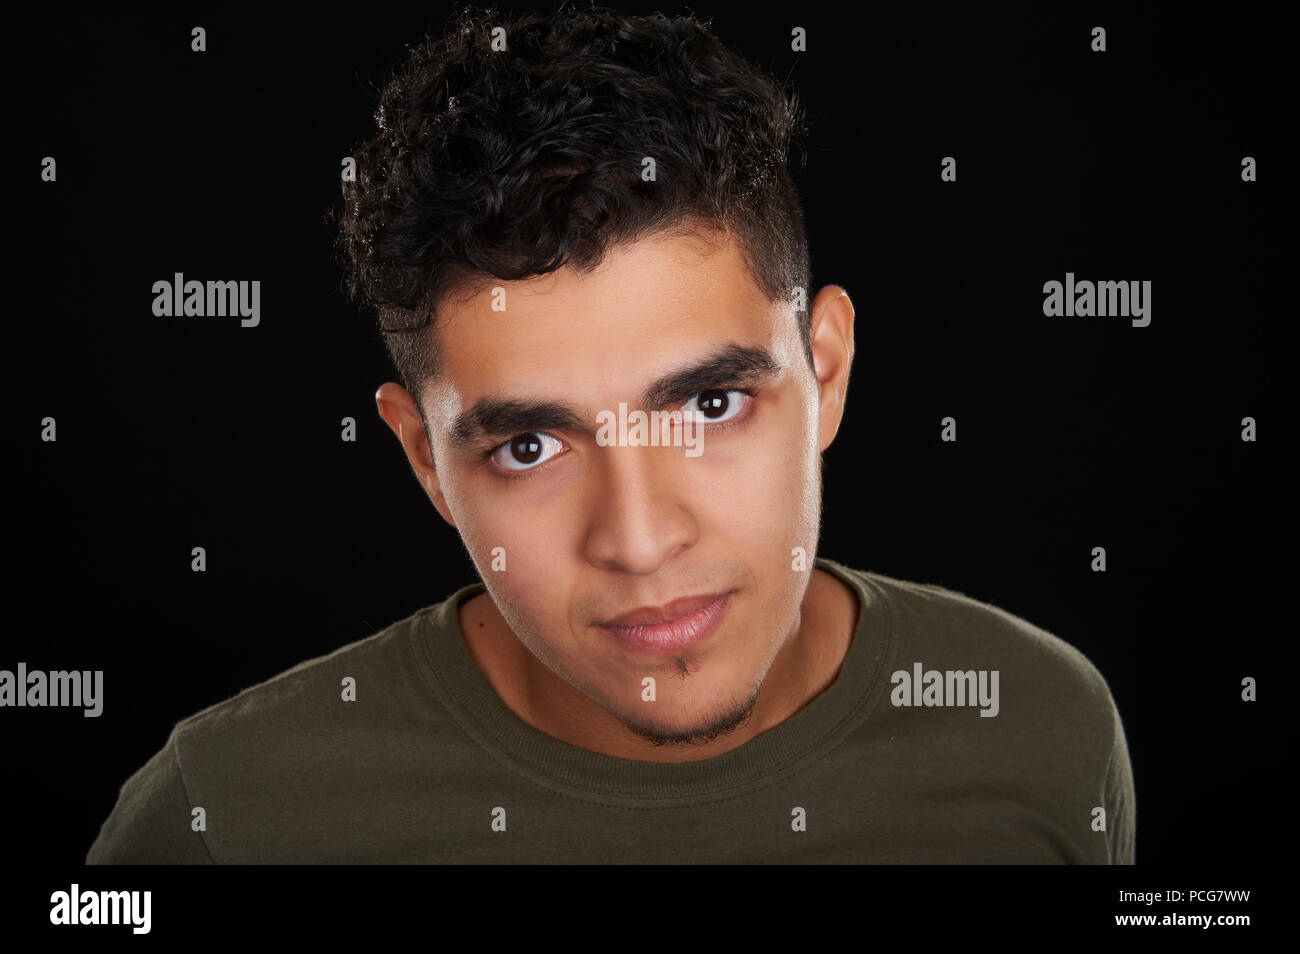 Studio portrait of a 19 years old friendly young man, wearing an olive t-shirt, looking to the camera Stock Photo